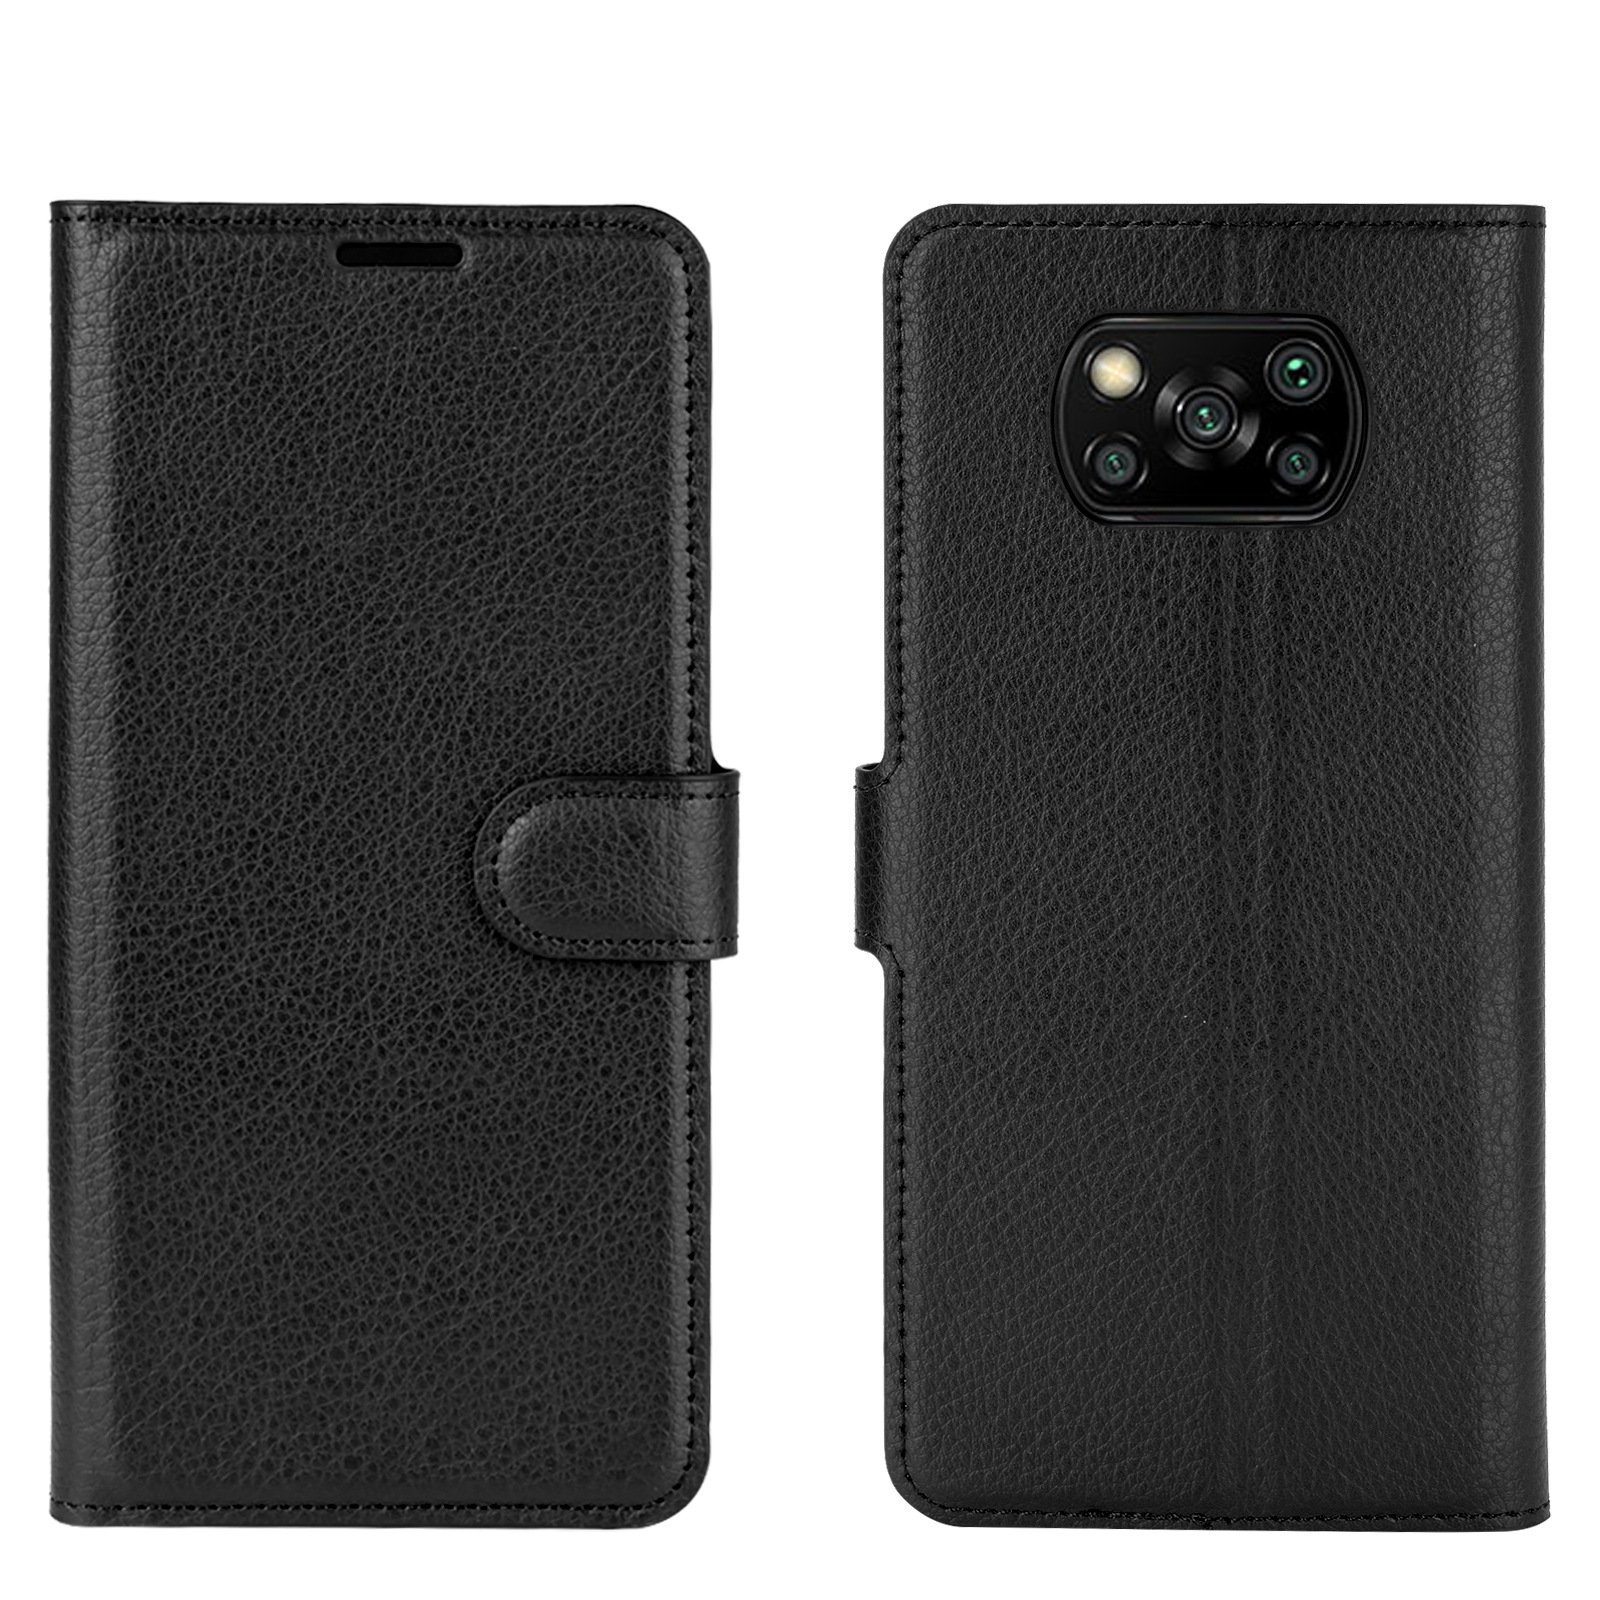 Bakeey for POCO X3 PRO / POCO X3 NFC Case Litchi Pattern Flip Shockproof PU Leather Full Body Protective Case